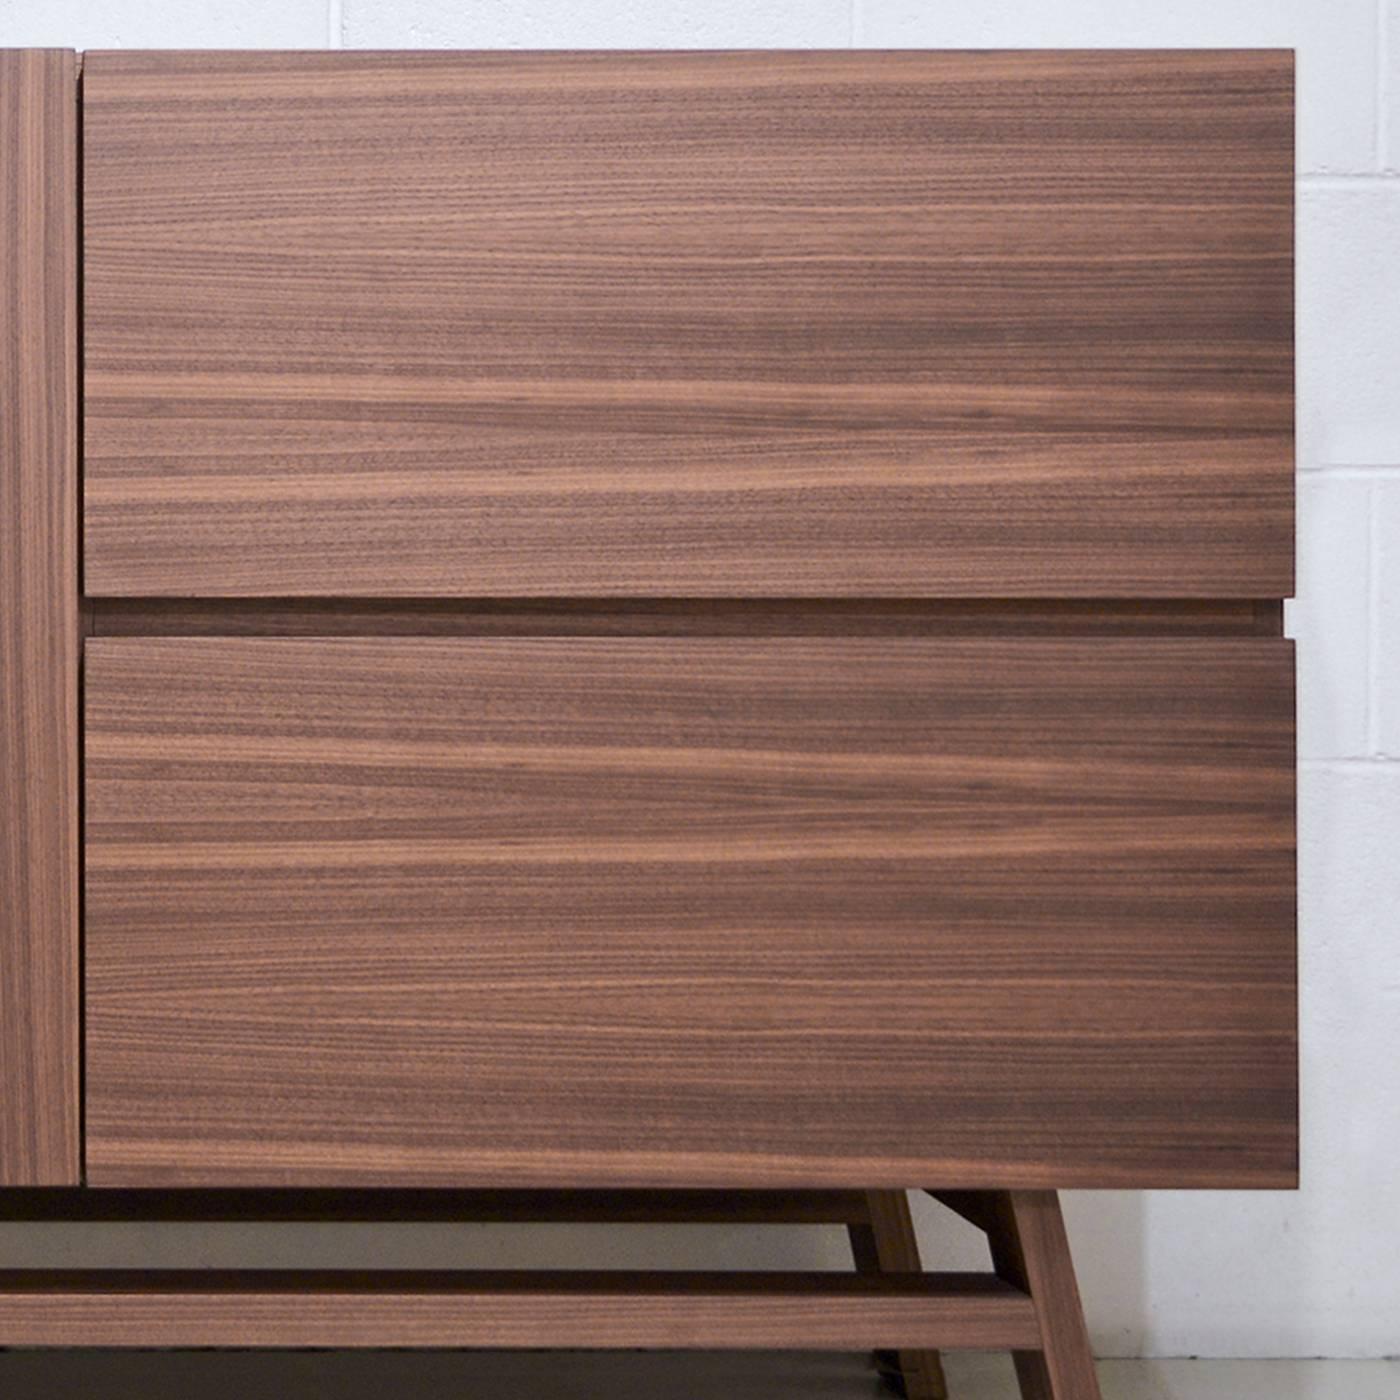 This minimalist sideboard in Canaletto walnut veneer, both inside and outside, displays high craftsmanship in all its details. This unique piece has two hinged doors revealing a single internal storage area with an adjustable shelf, two visible